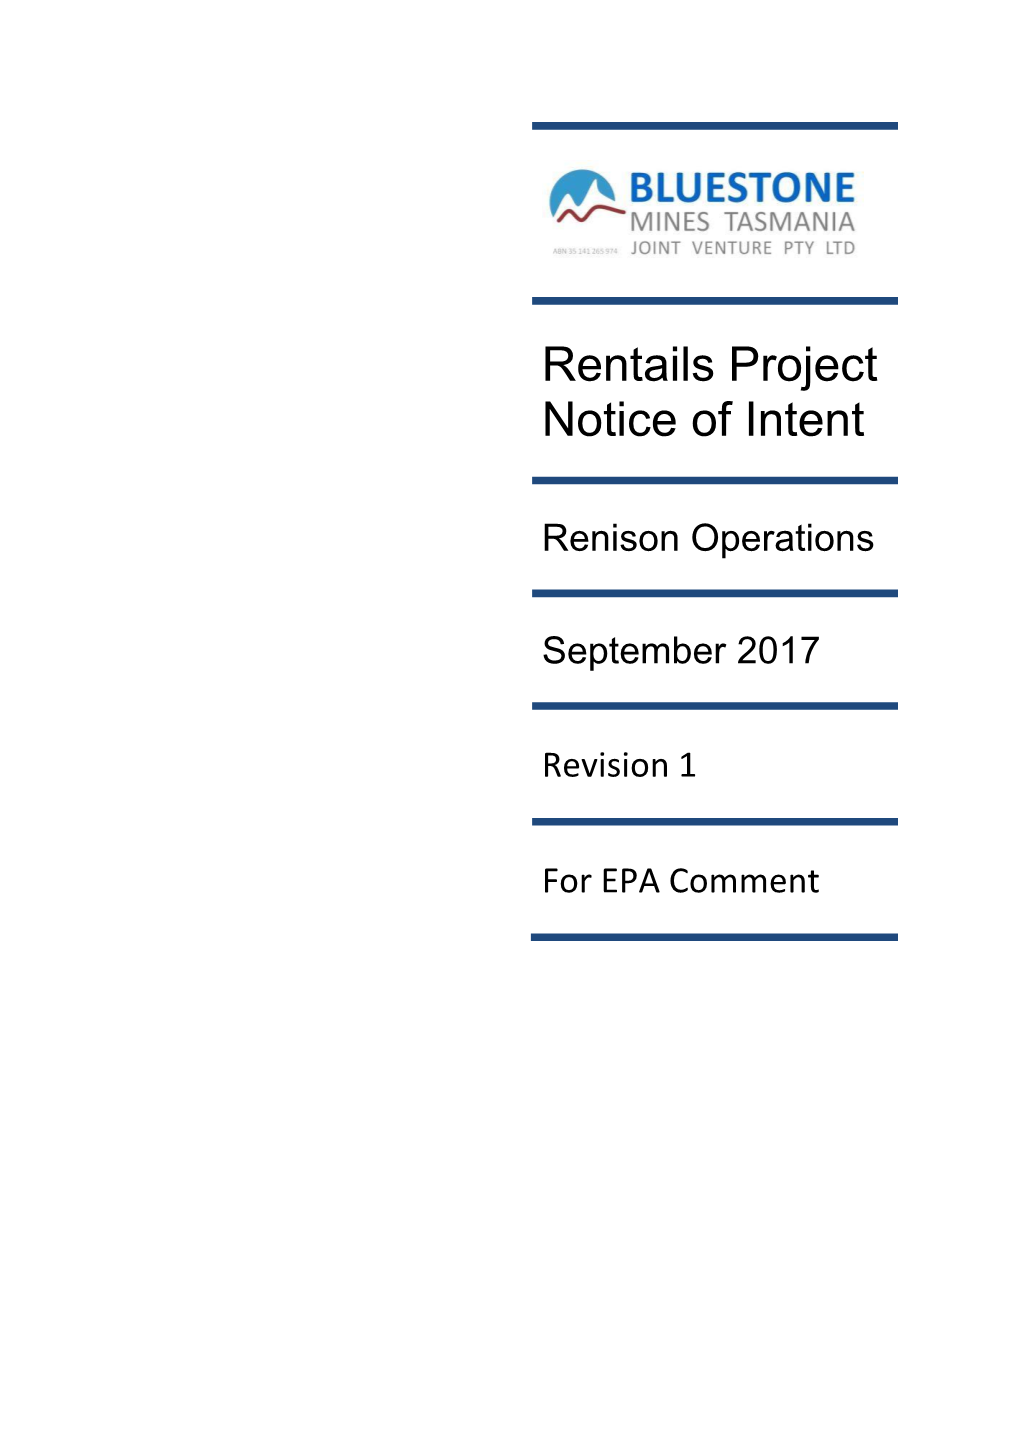 Rentails Project Notice of Intent